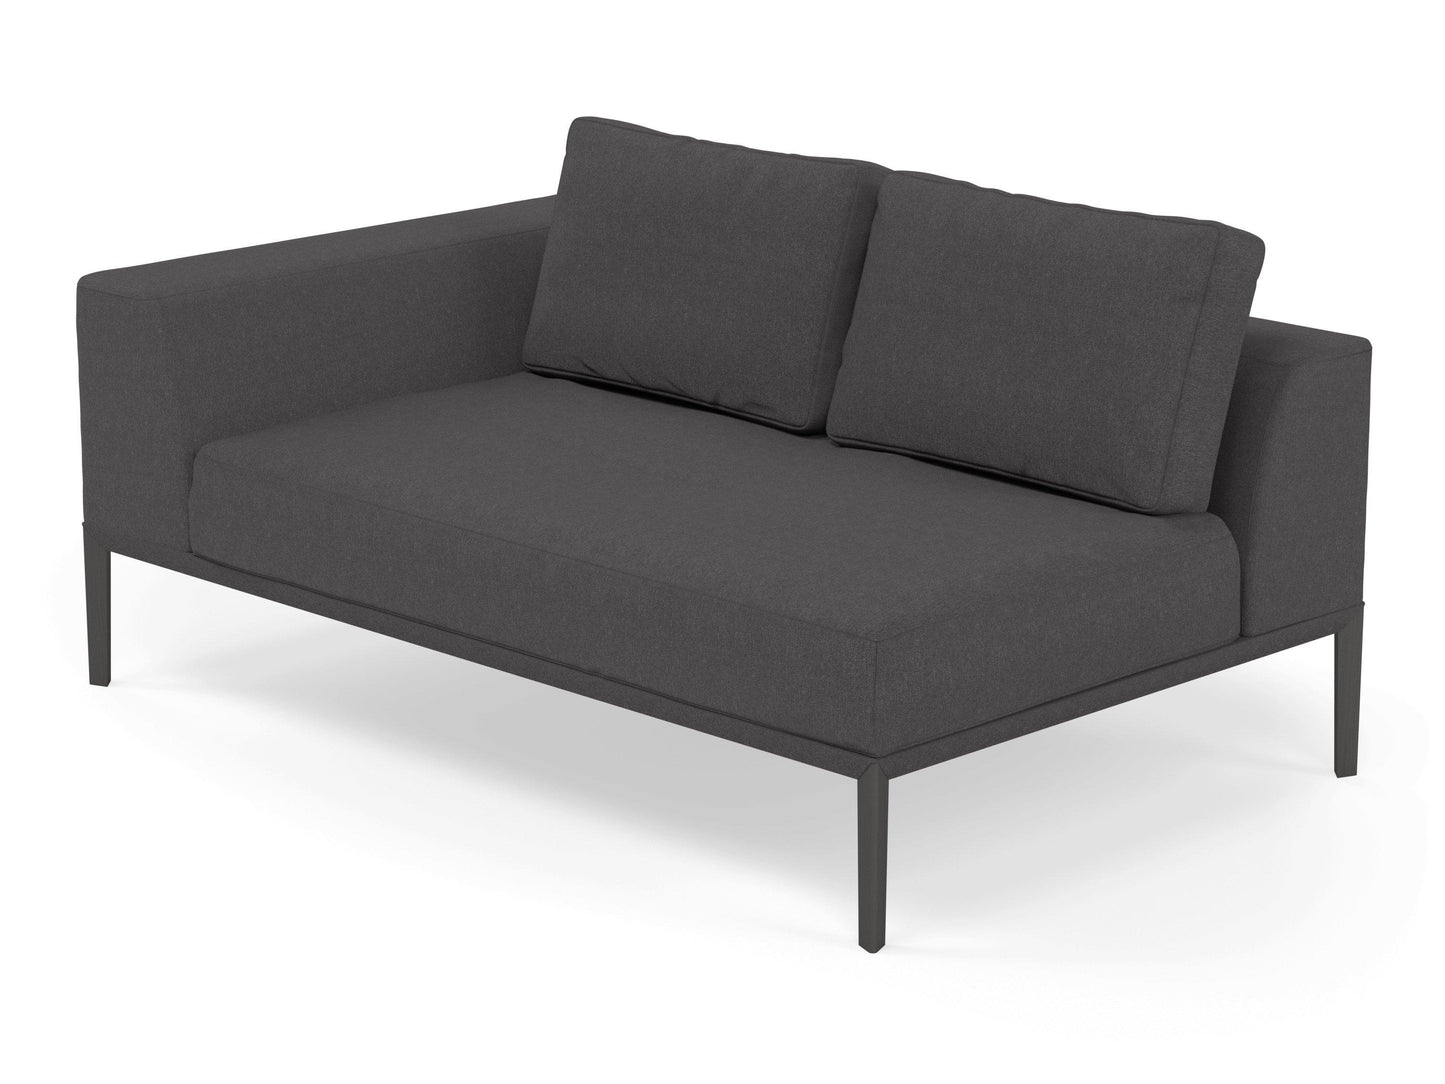 Modern 2 Seater Chaise Lounge Style Sofa with Right Armrest in Slate Grey Fabric-Distinct Designs (London) Ltd